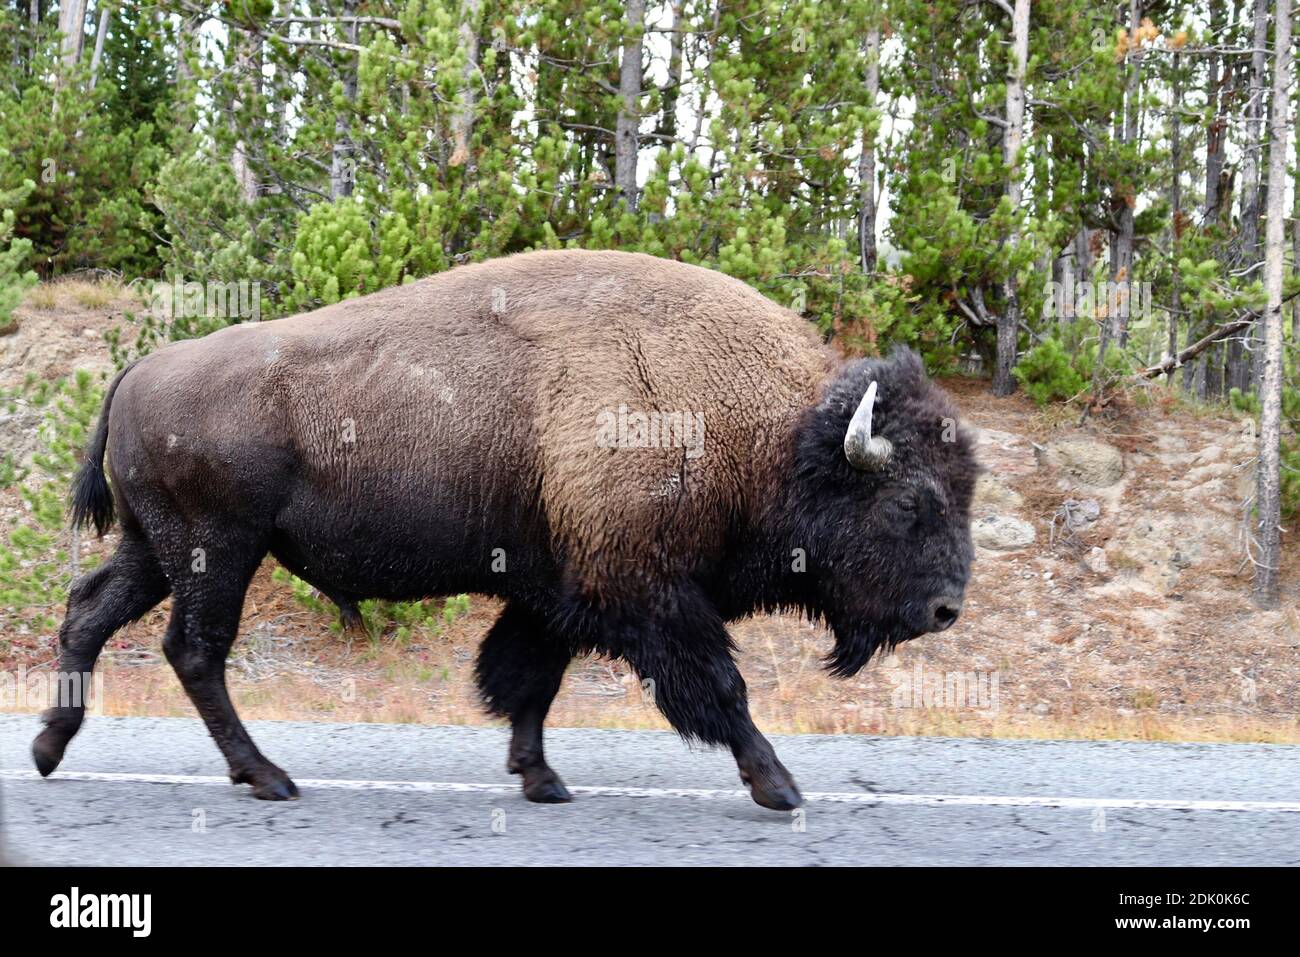 Side View Of American Bison Walking On Road Stock Photo - Alamy